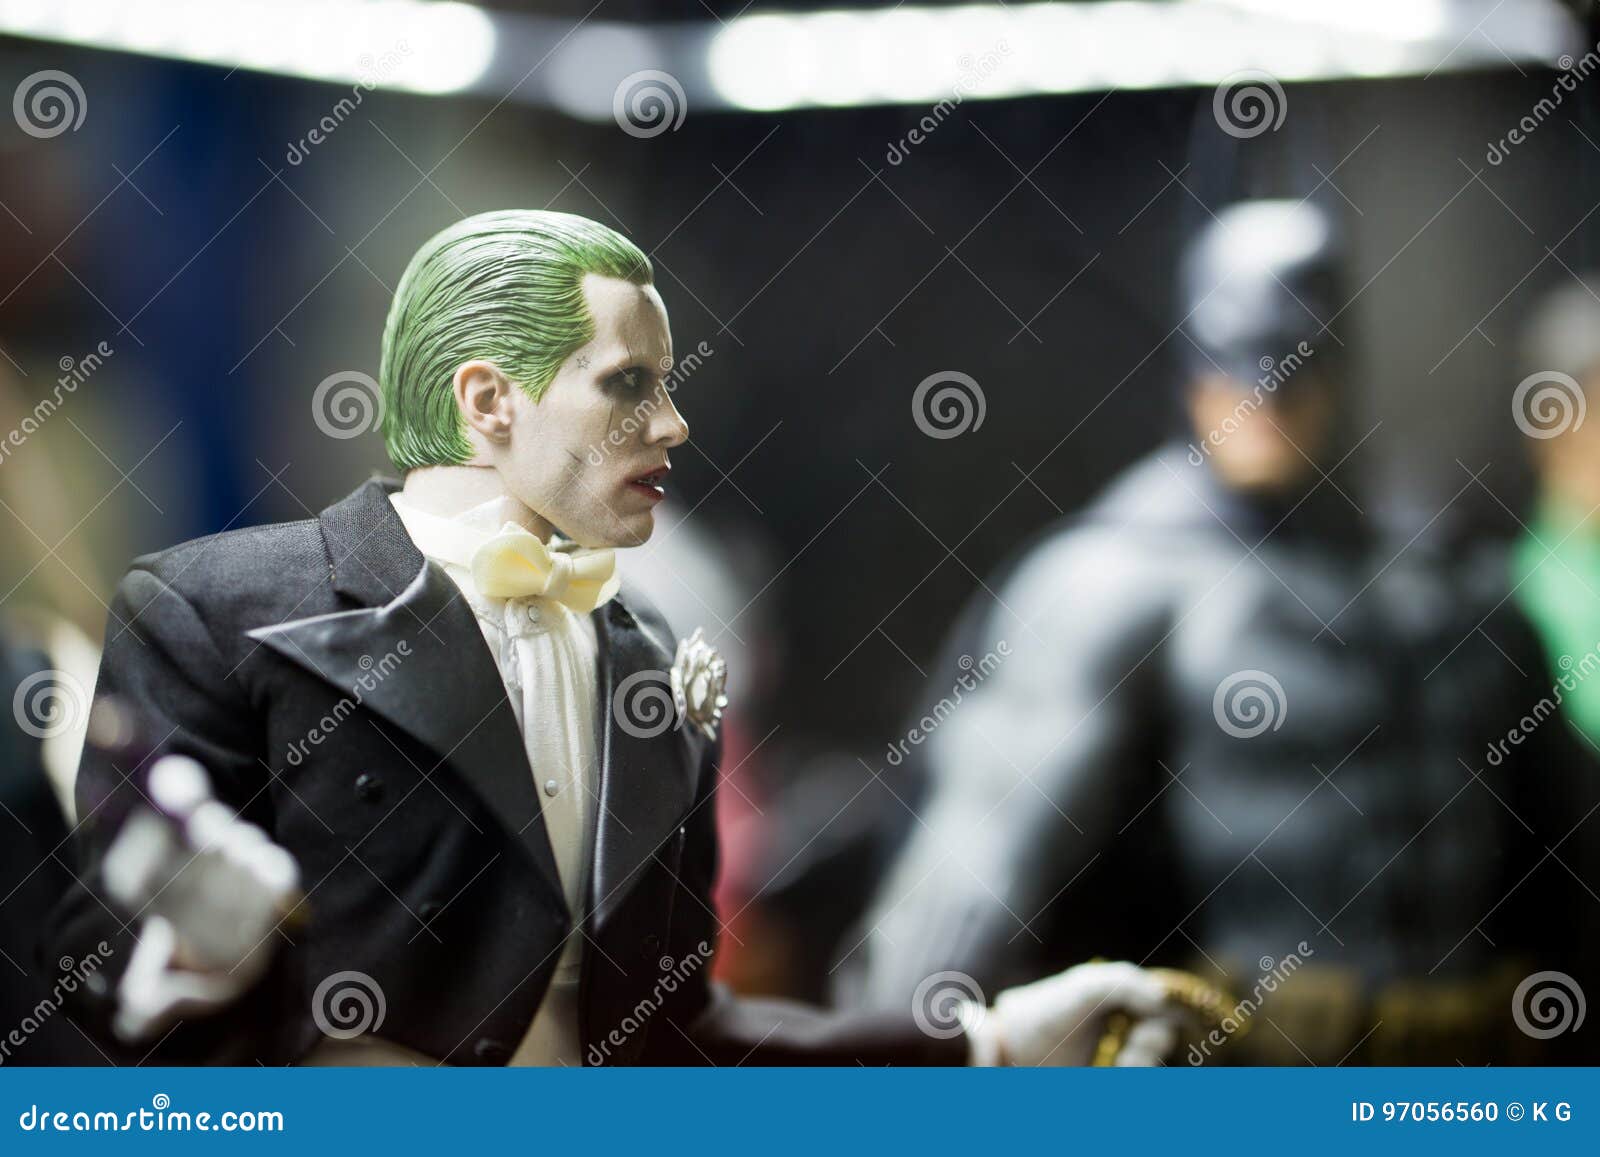 Joker Character Collectible Model and Blurred Batman Model on the  Background Editorial Image - Image of editorial, film: 97056560